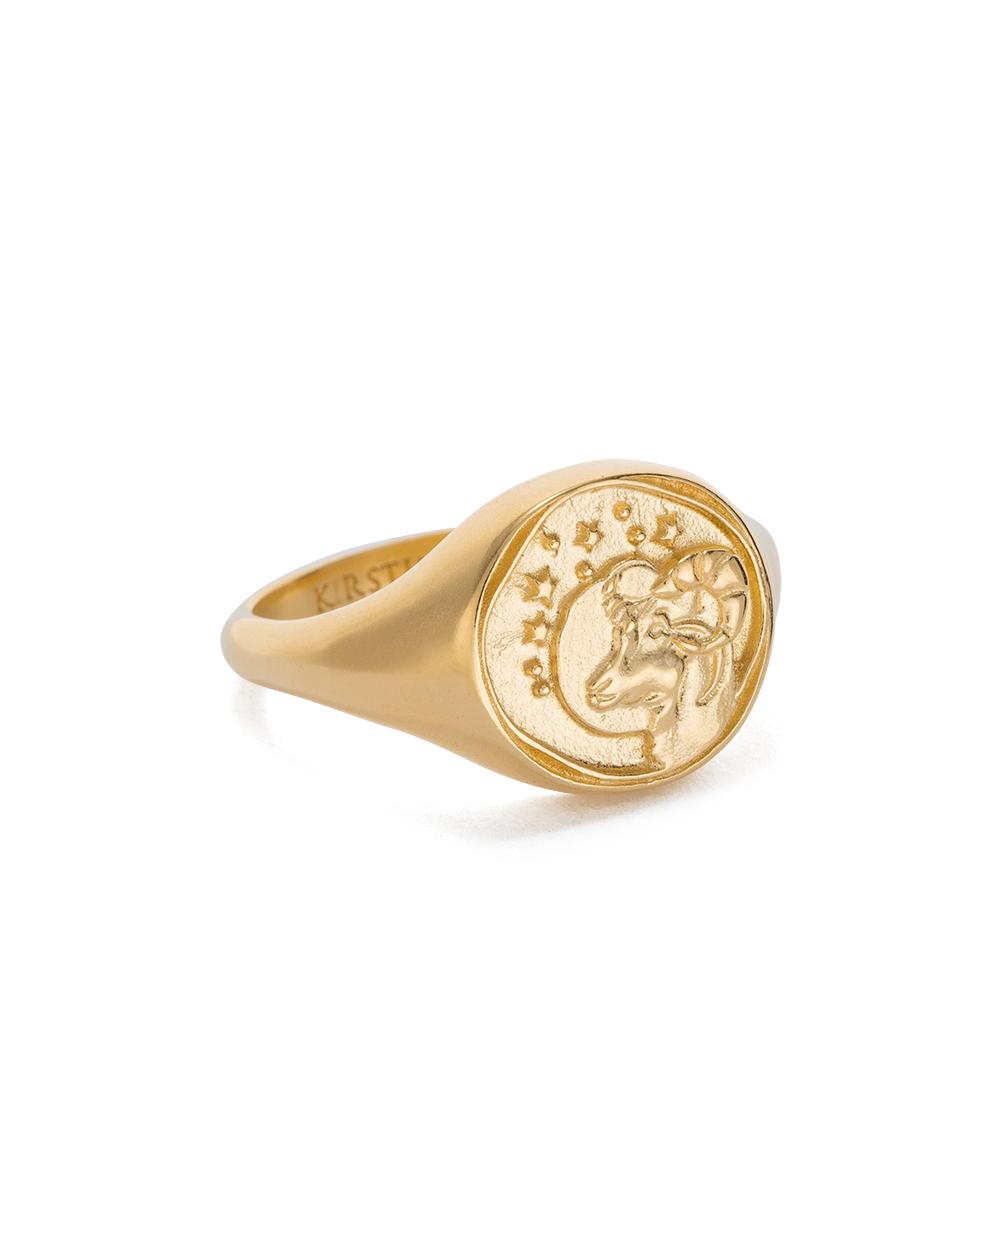 King of Lion Rings | Gold Lion Signet Ring | Unique Mens Jewelry -  Proclamation